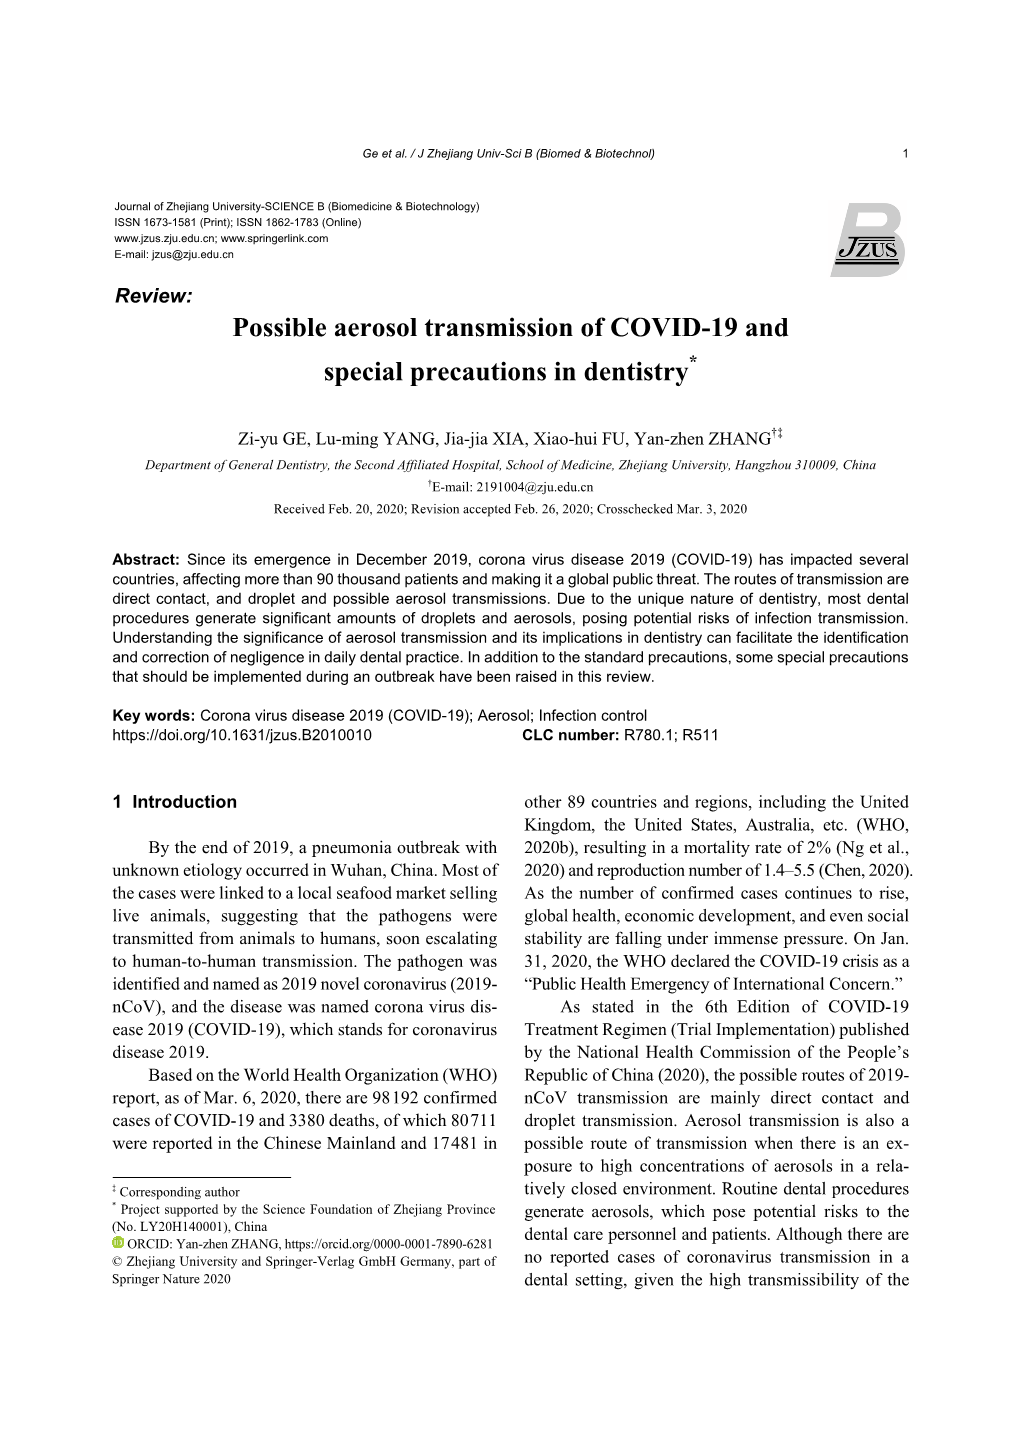 Possible Aerosol Transmission of COVID-19 and Special Precautions in Dentistry*